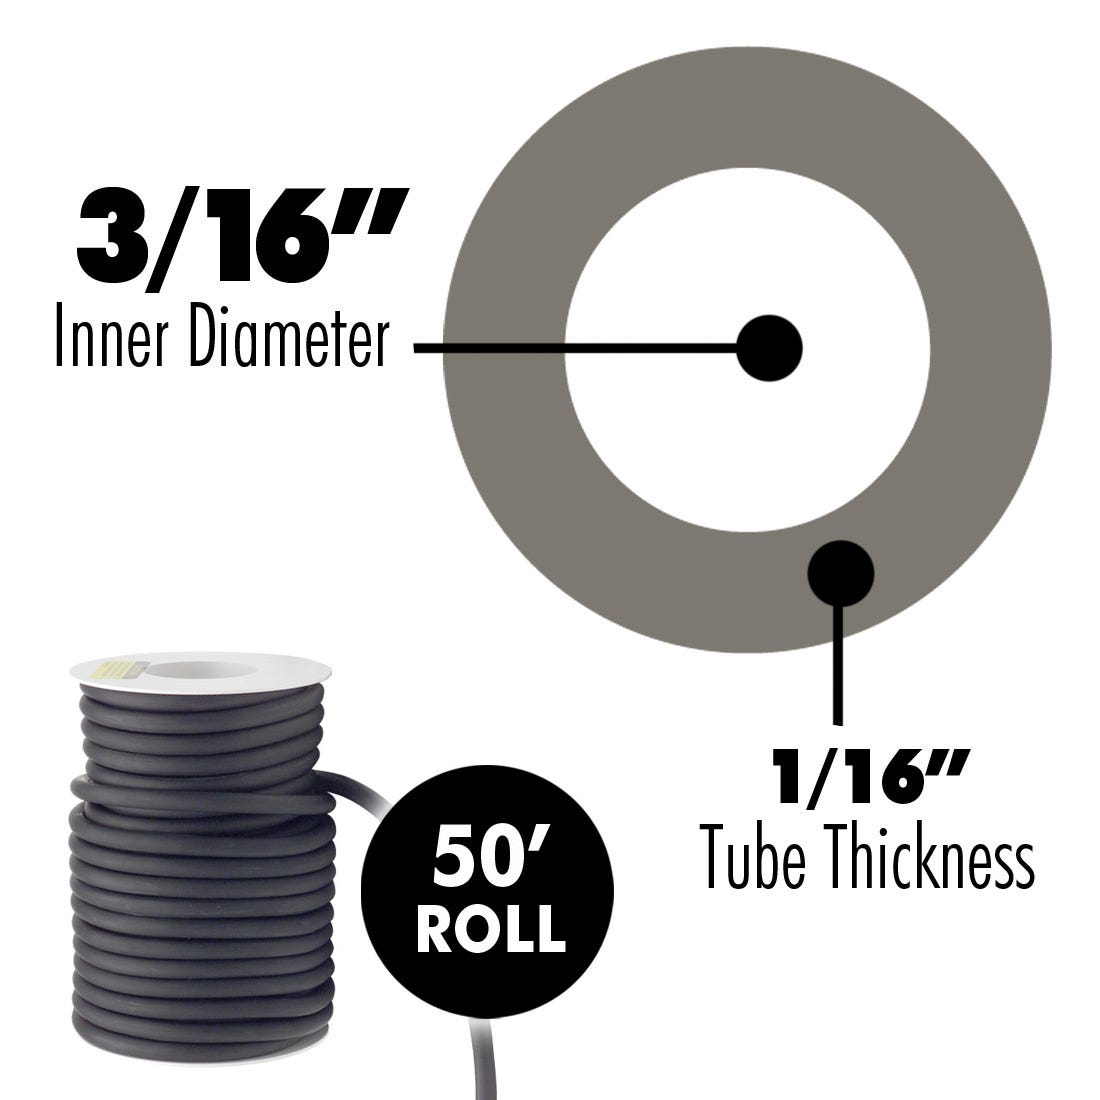 ACE Latex Rubber Tubing Black, 3/16" x 1/16"- 50' Roll